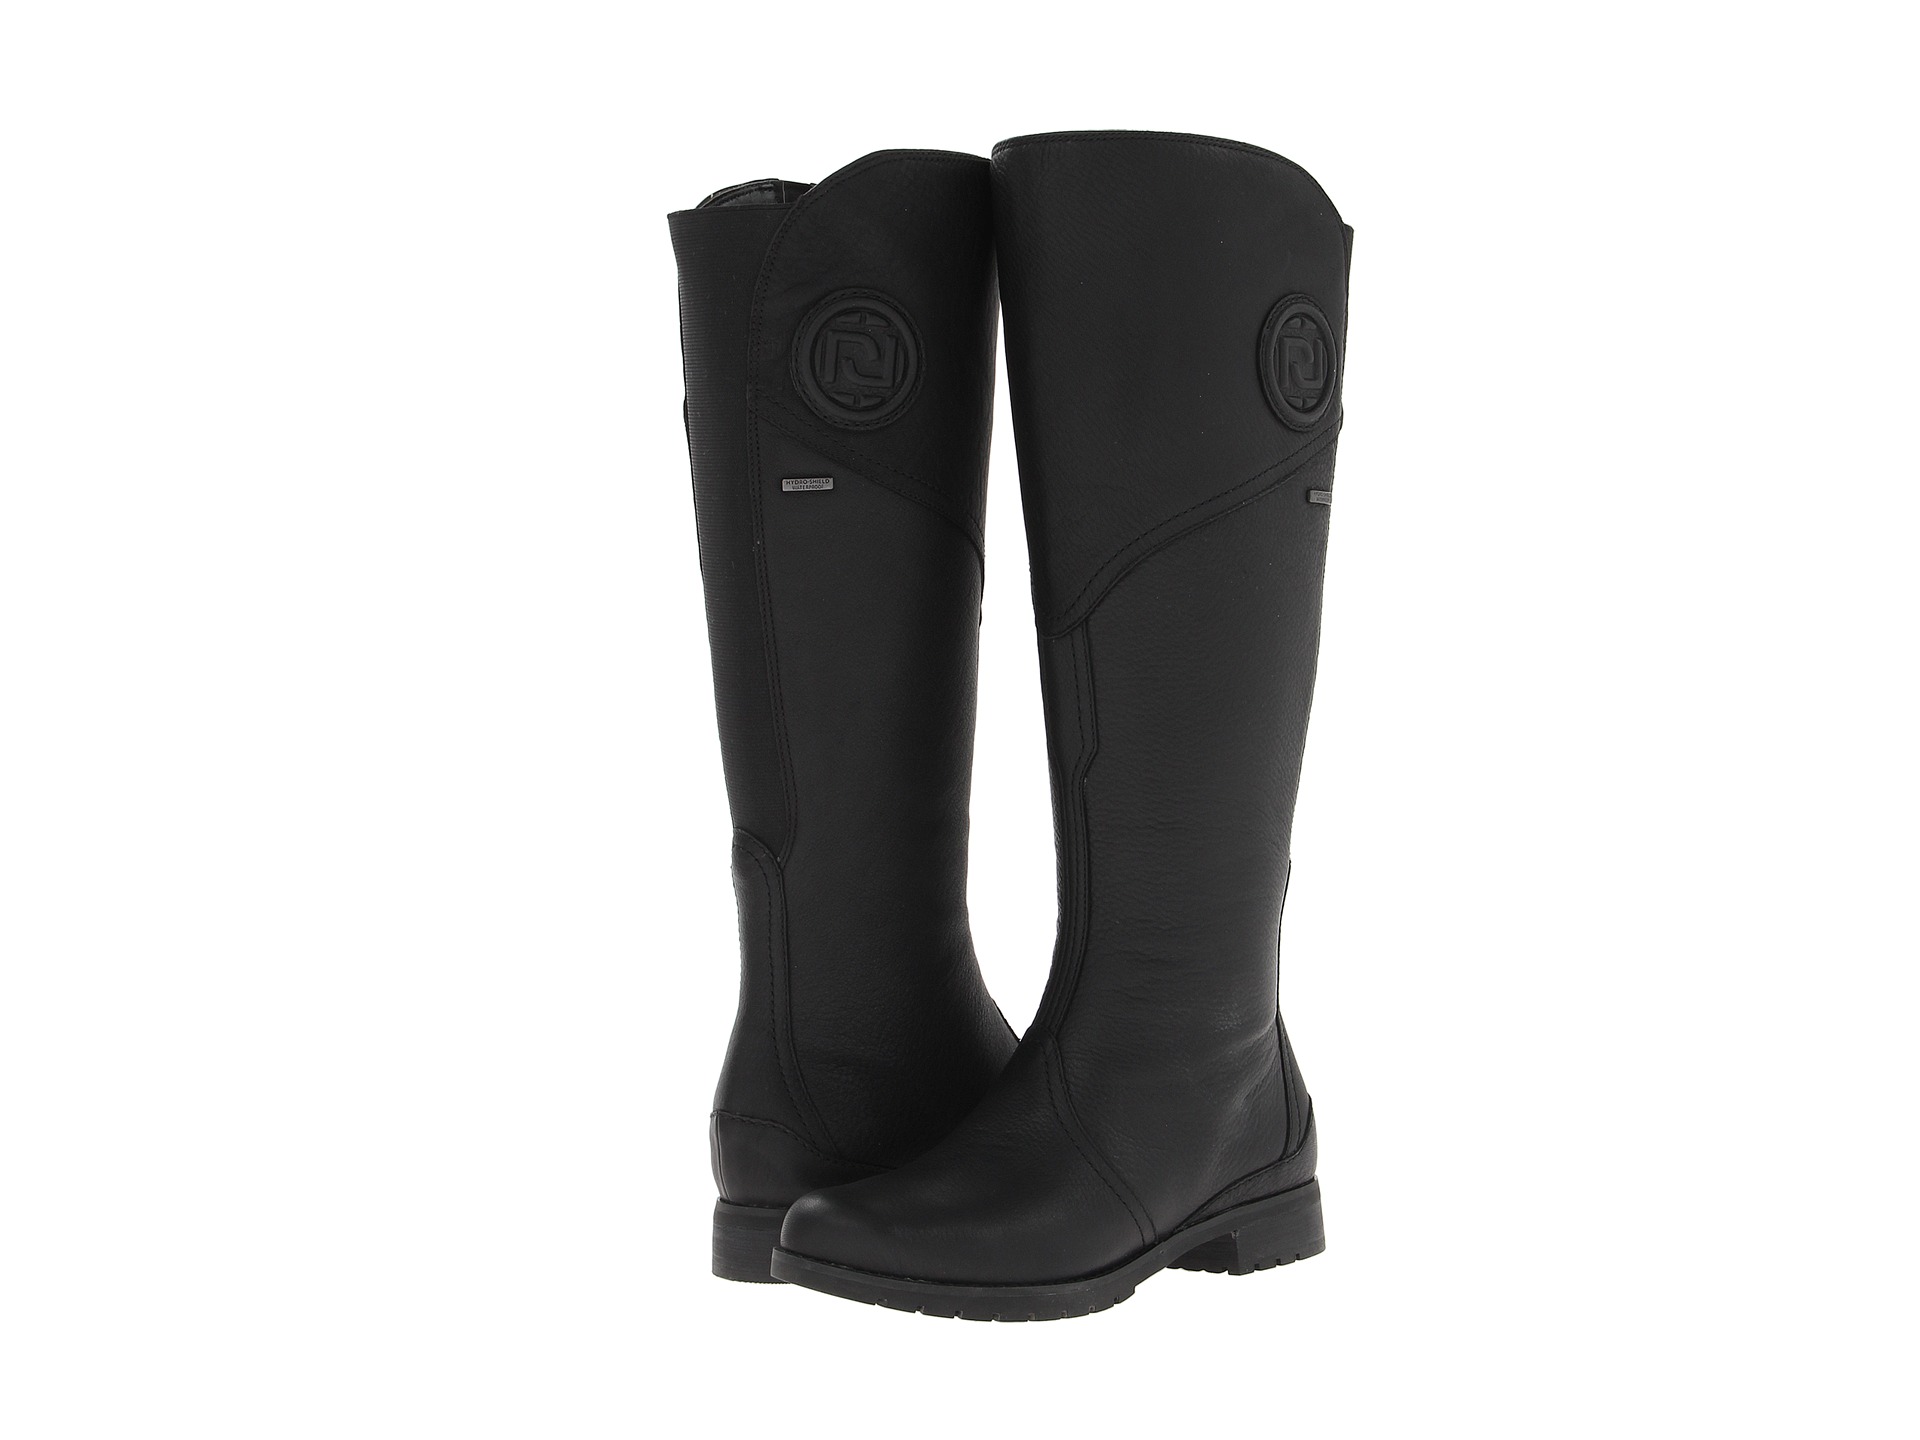 Rockport Tristina Gore Tall Boot Wide Calf | Shipped Free at Zappos